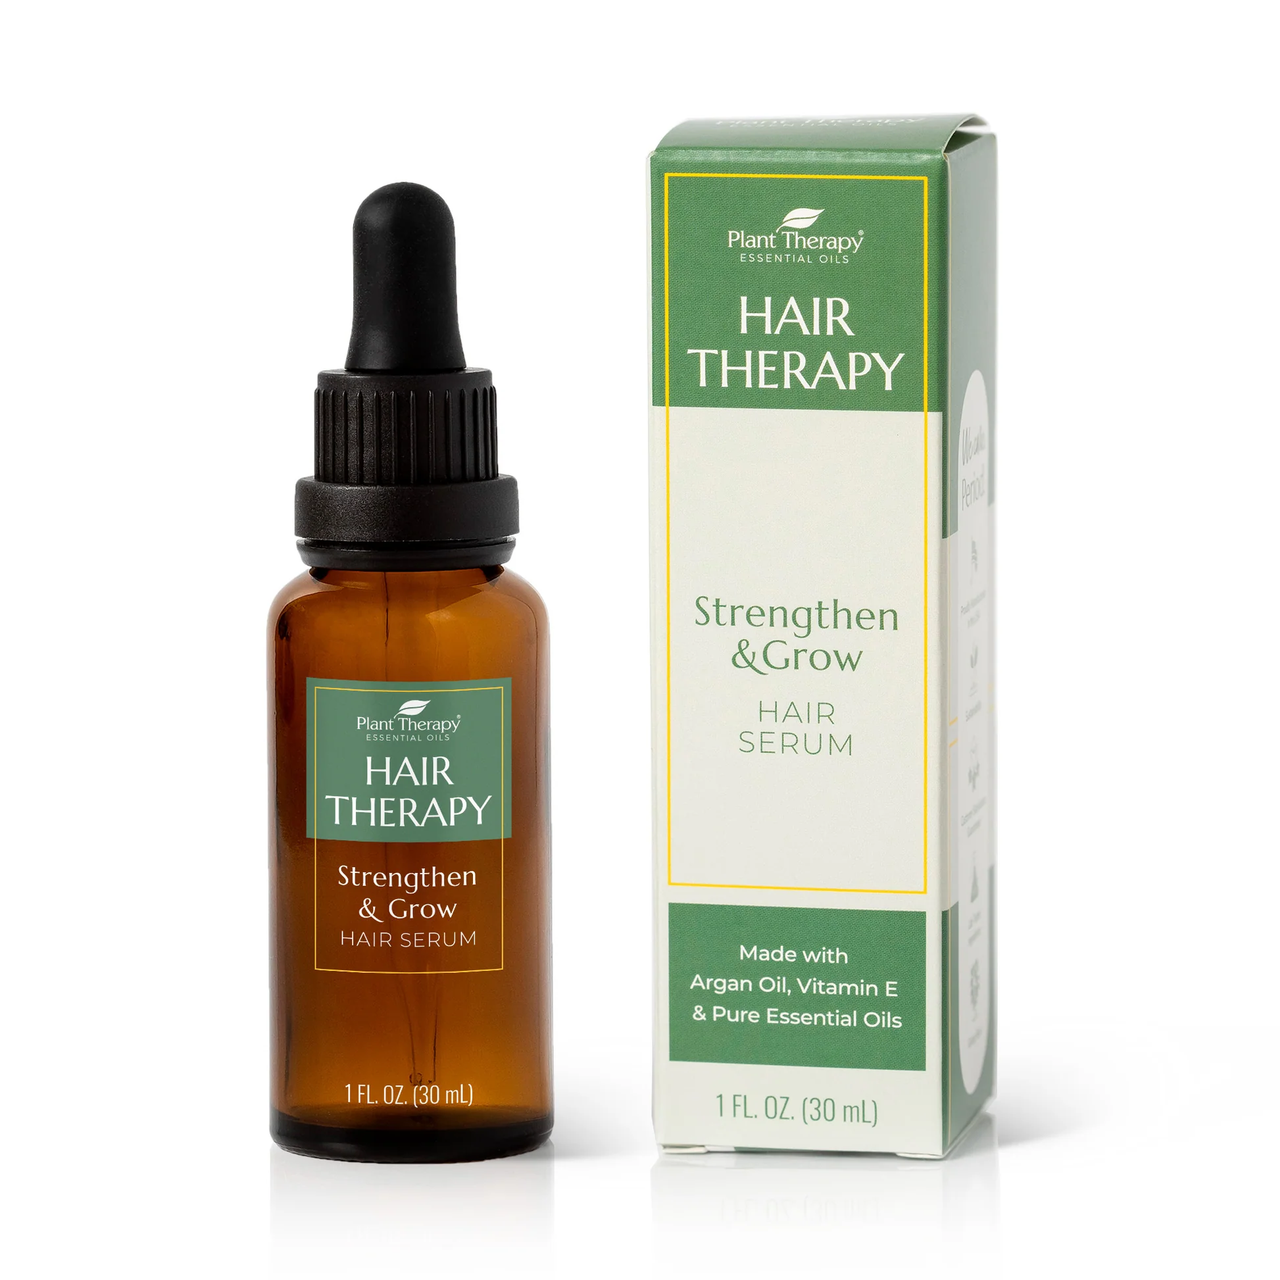 Hair Therapy Strengthen & Grow Hair Serum - Plant Therapy